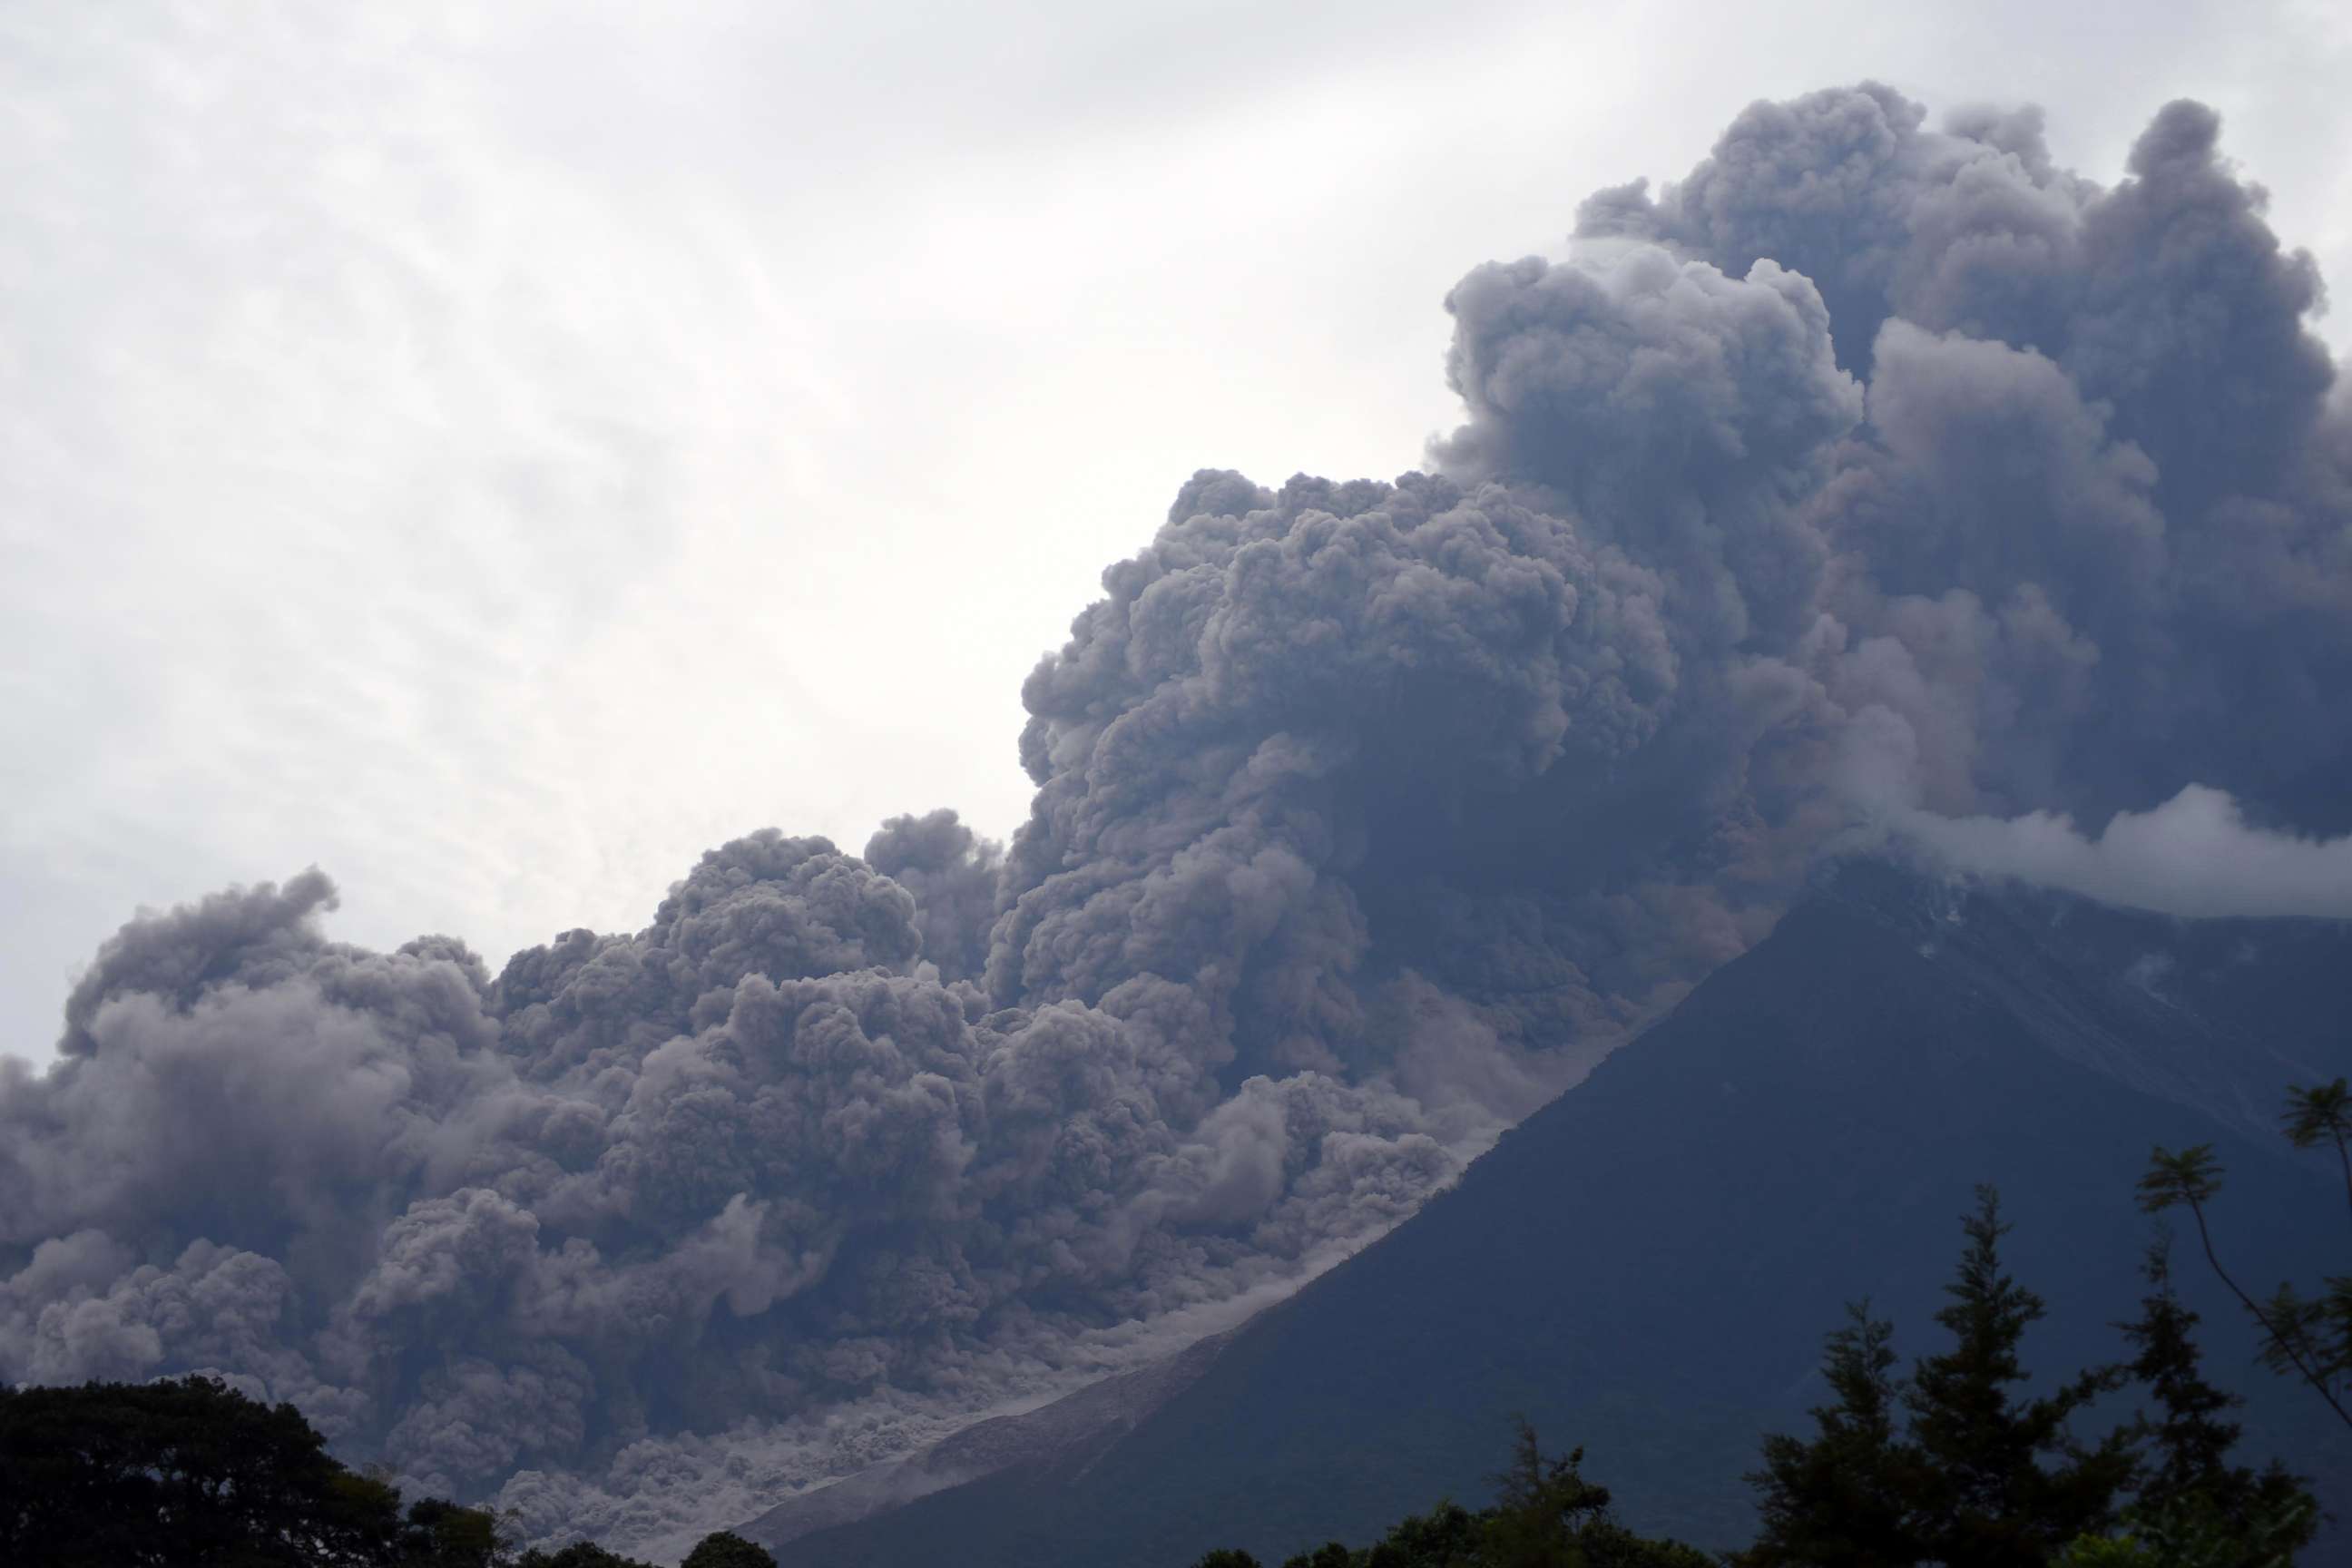 PHOTO: The Fuego Volcano in eruption, seen from Alotenango municipality, Sacatepequez department, about 40 miles southwest of Guatemala City, June 3, 2018.